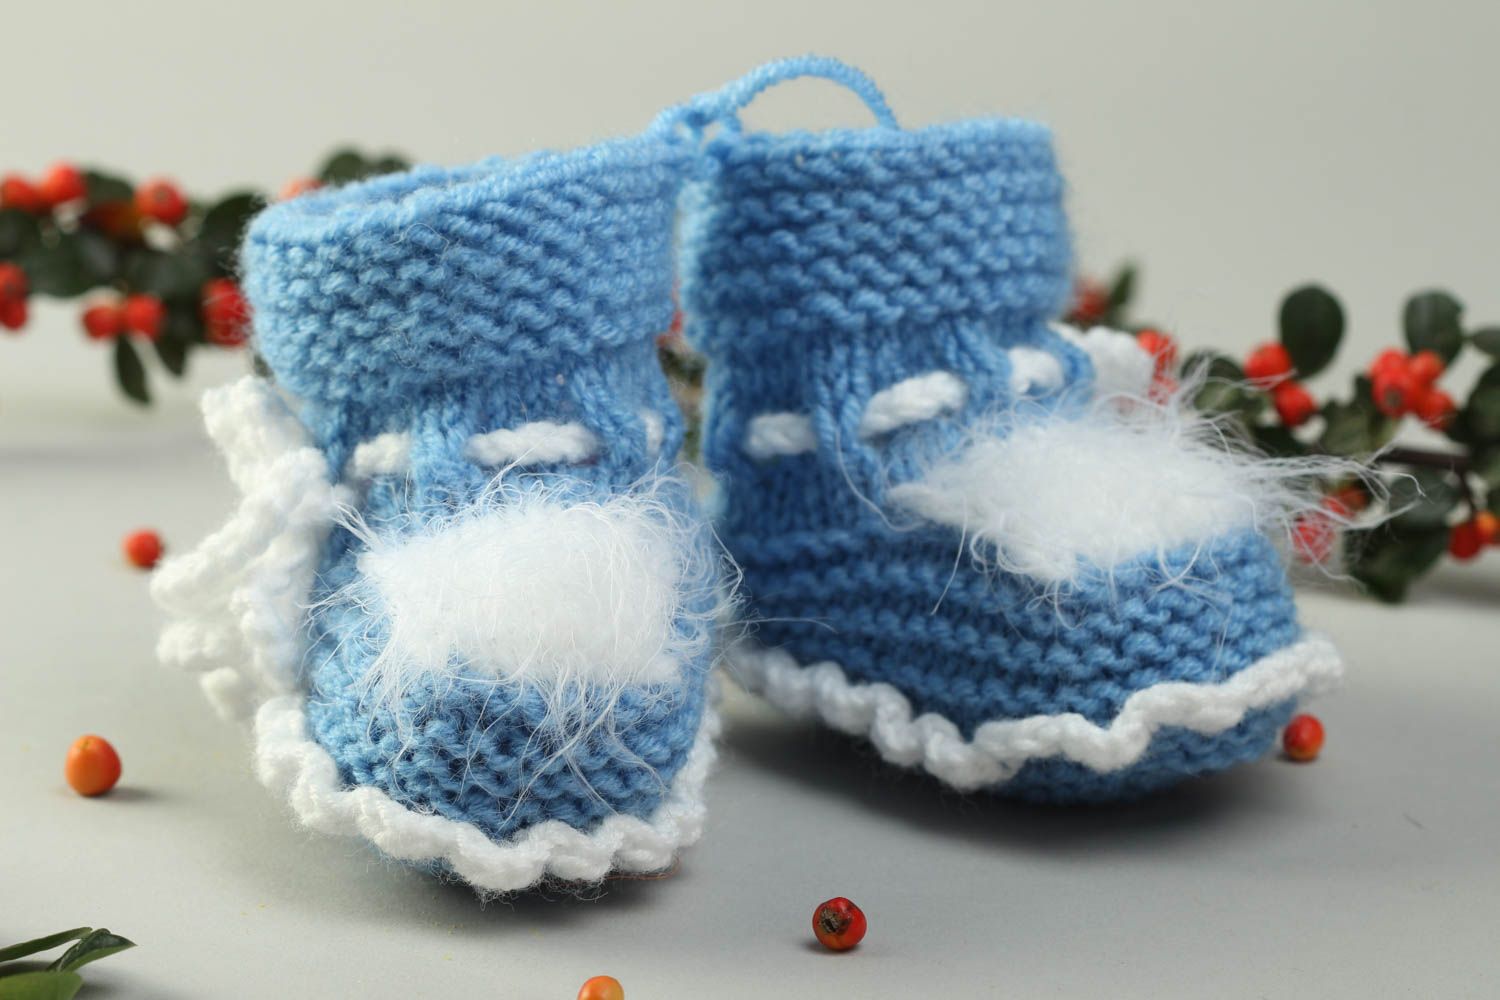 Cute handmade baby bootees warm baby booties crochet ideas gifts for kids photo 1